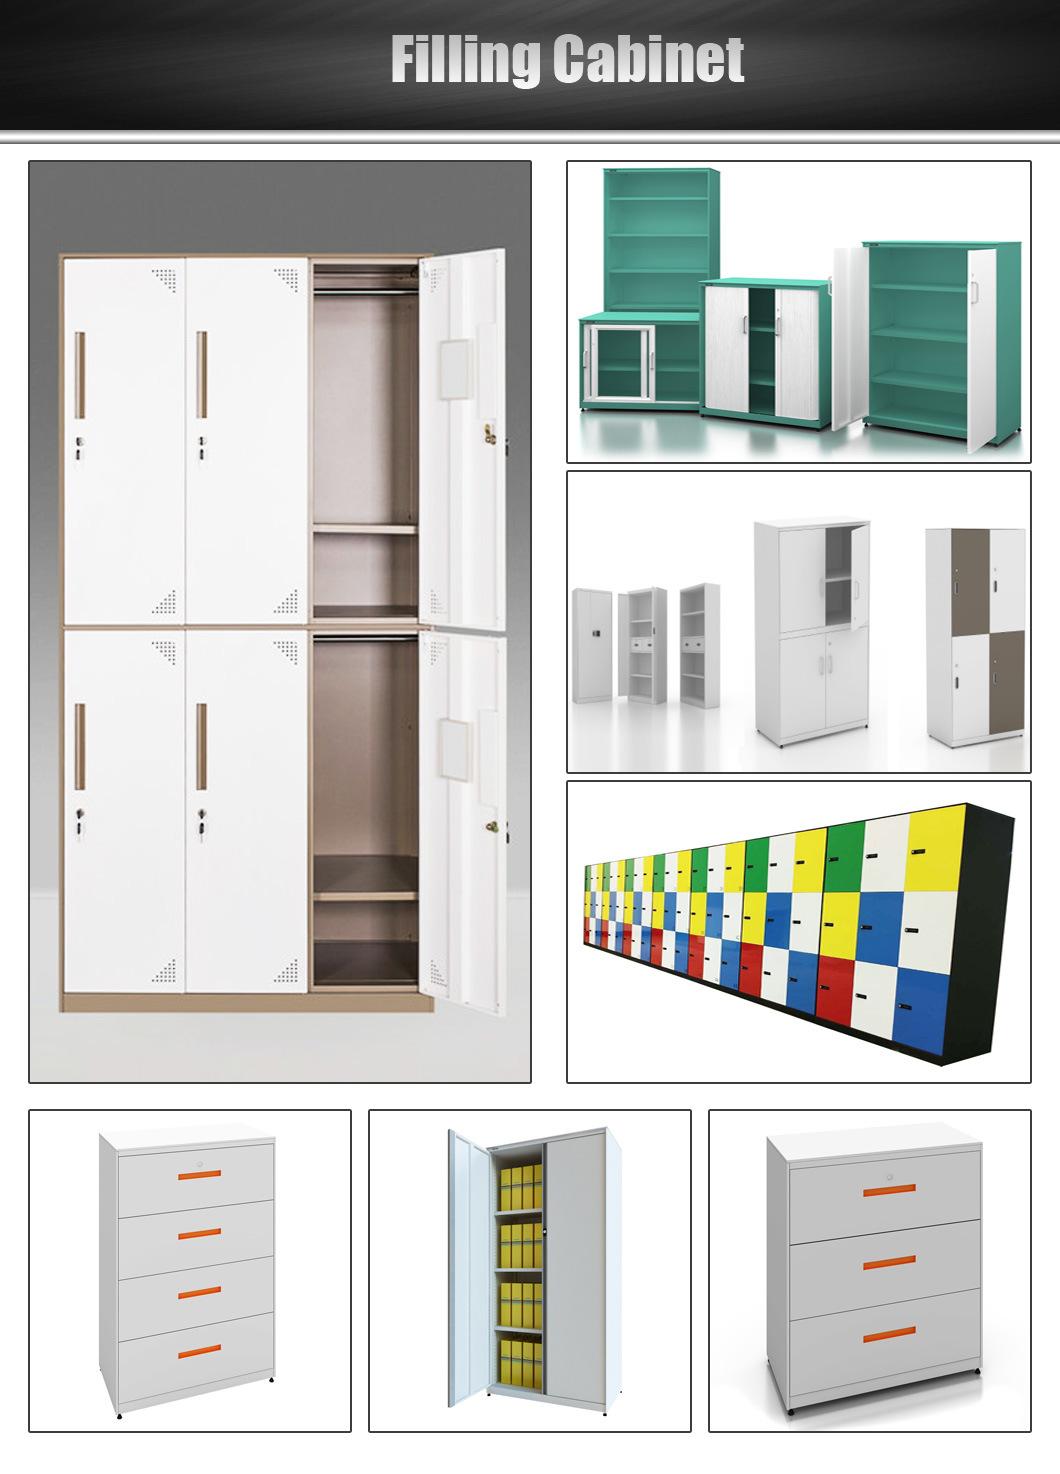 Professional Design Work Storage Cabinets with Environmentally-Friendly Materials